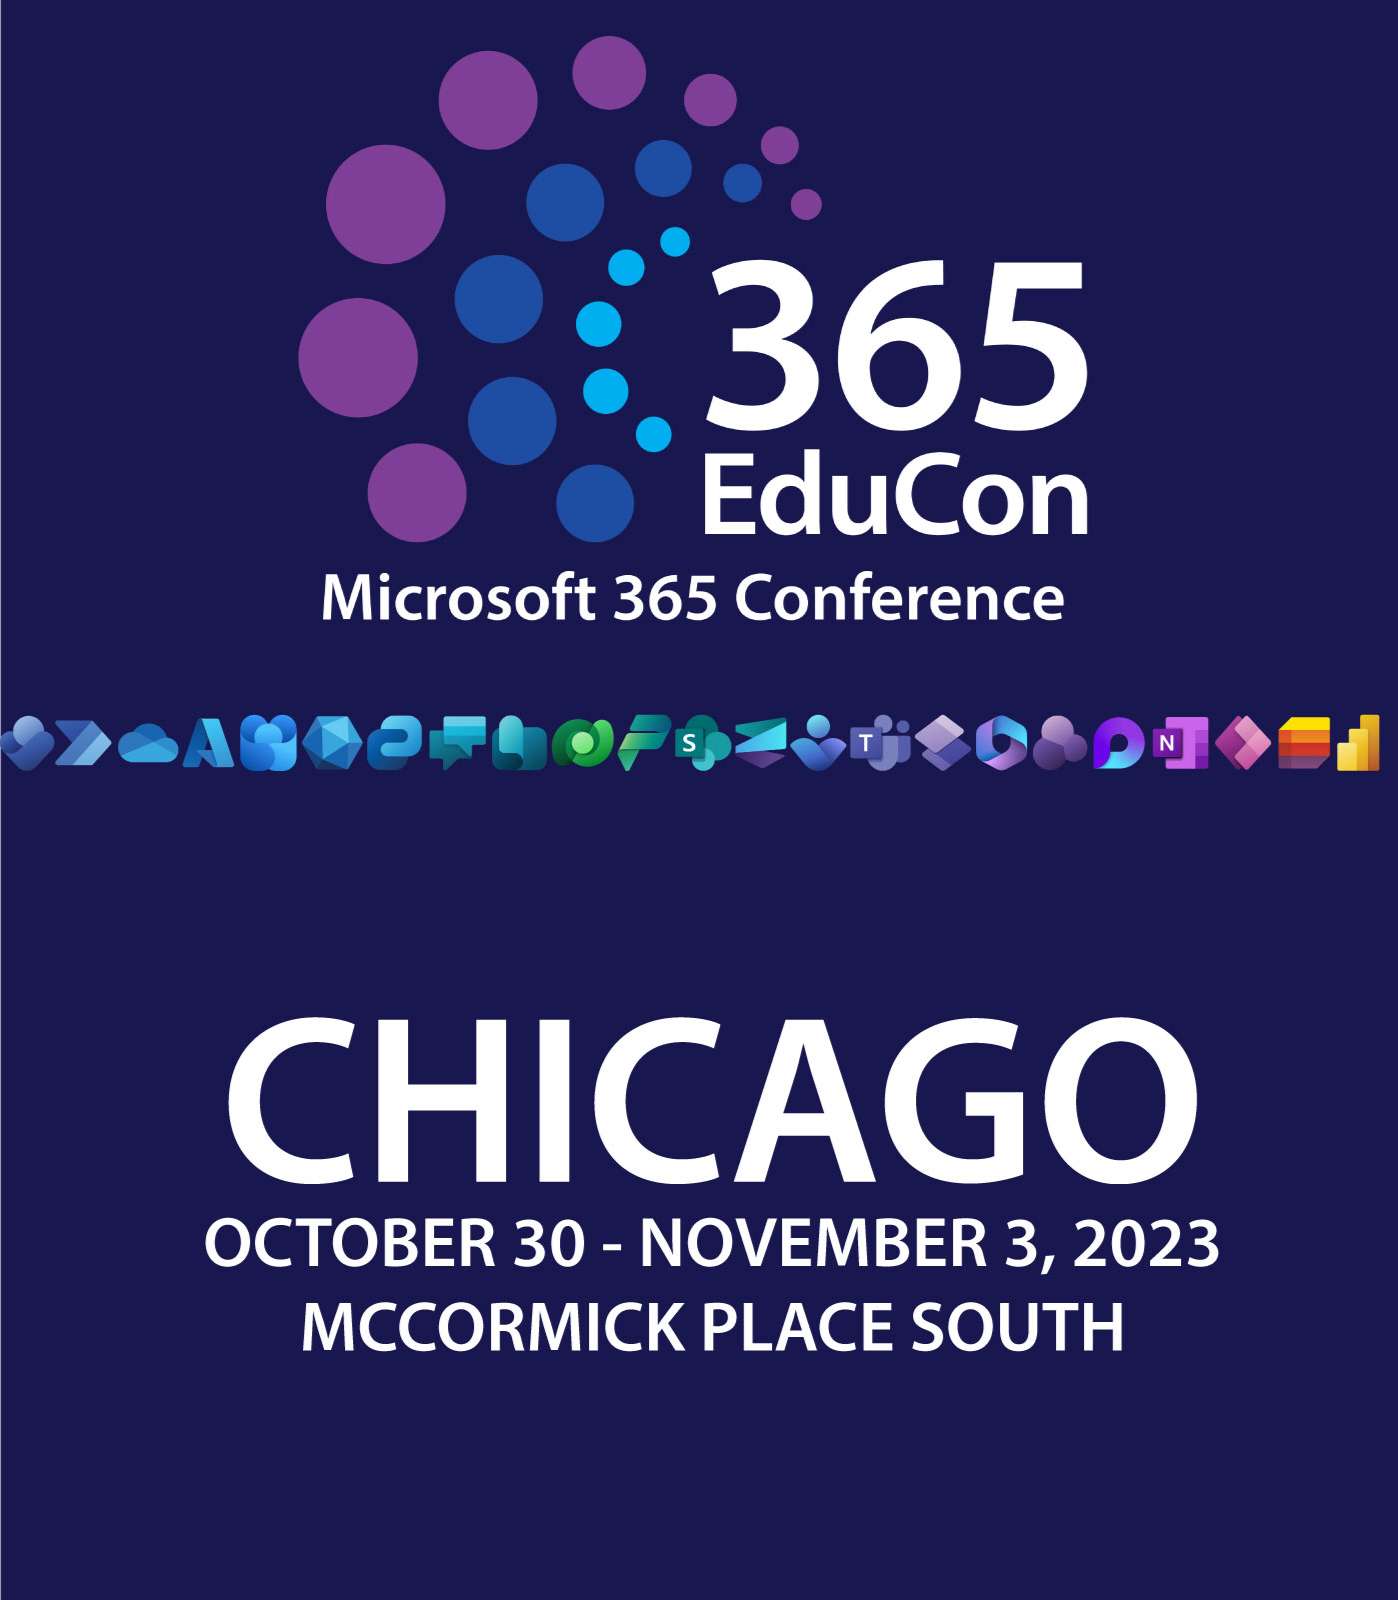 Community Days 365 EduCon Chicago A Microsoft 365 Conference